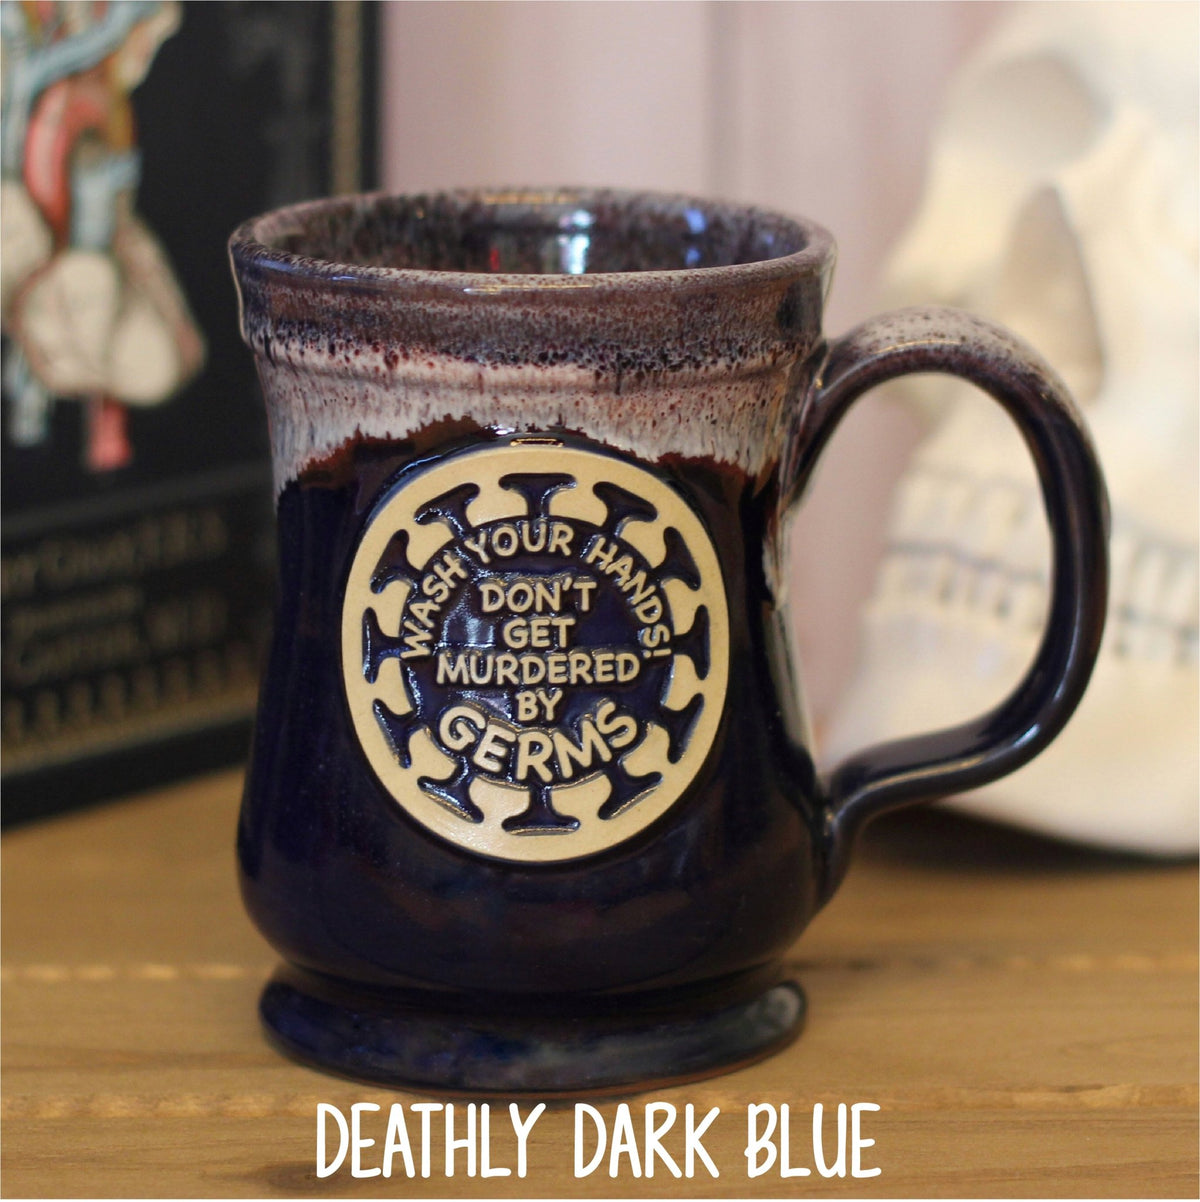 Murdered by Germs! Handcrafted Pottery Mug - Rad Girl Creations